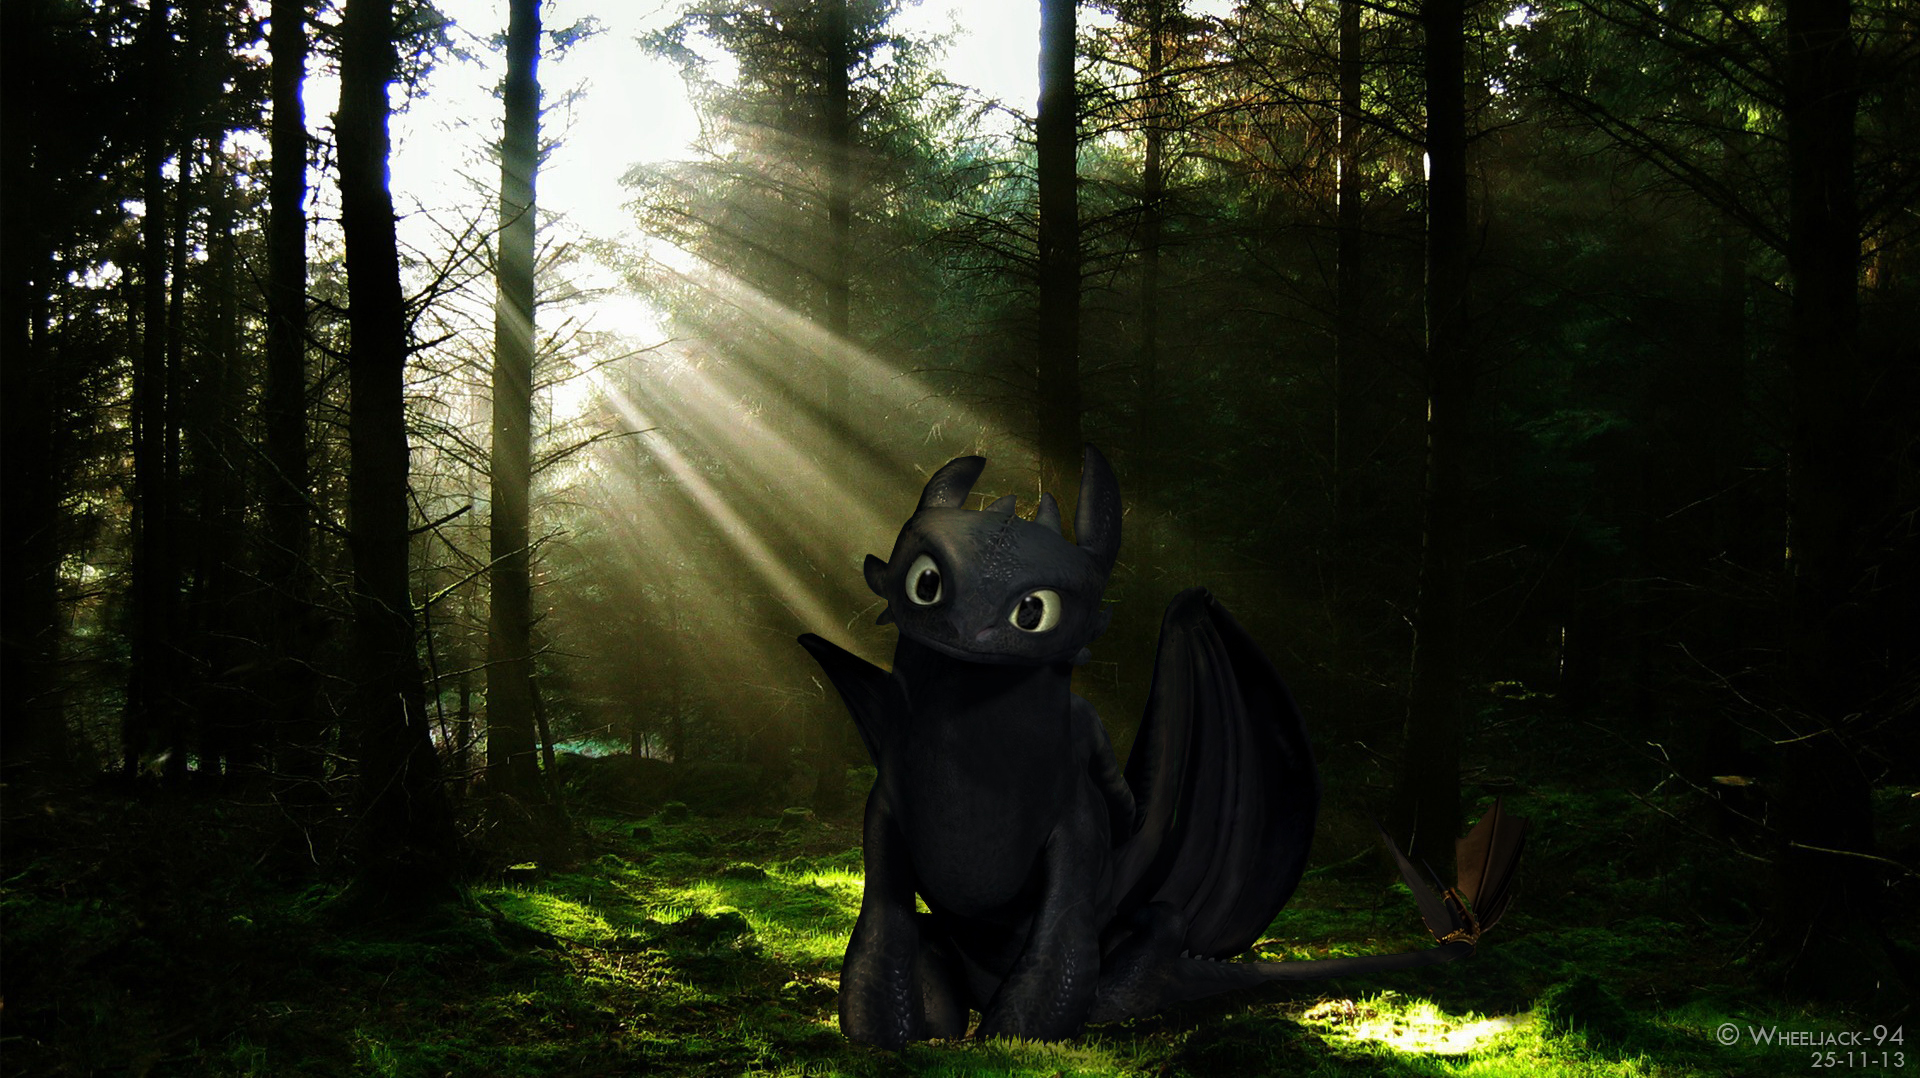 Download wallpaper 950x1534 toothless and light fury romantic love  dragons iphone 950x1534 hd background 15368